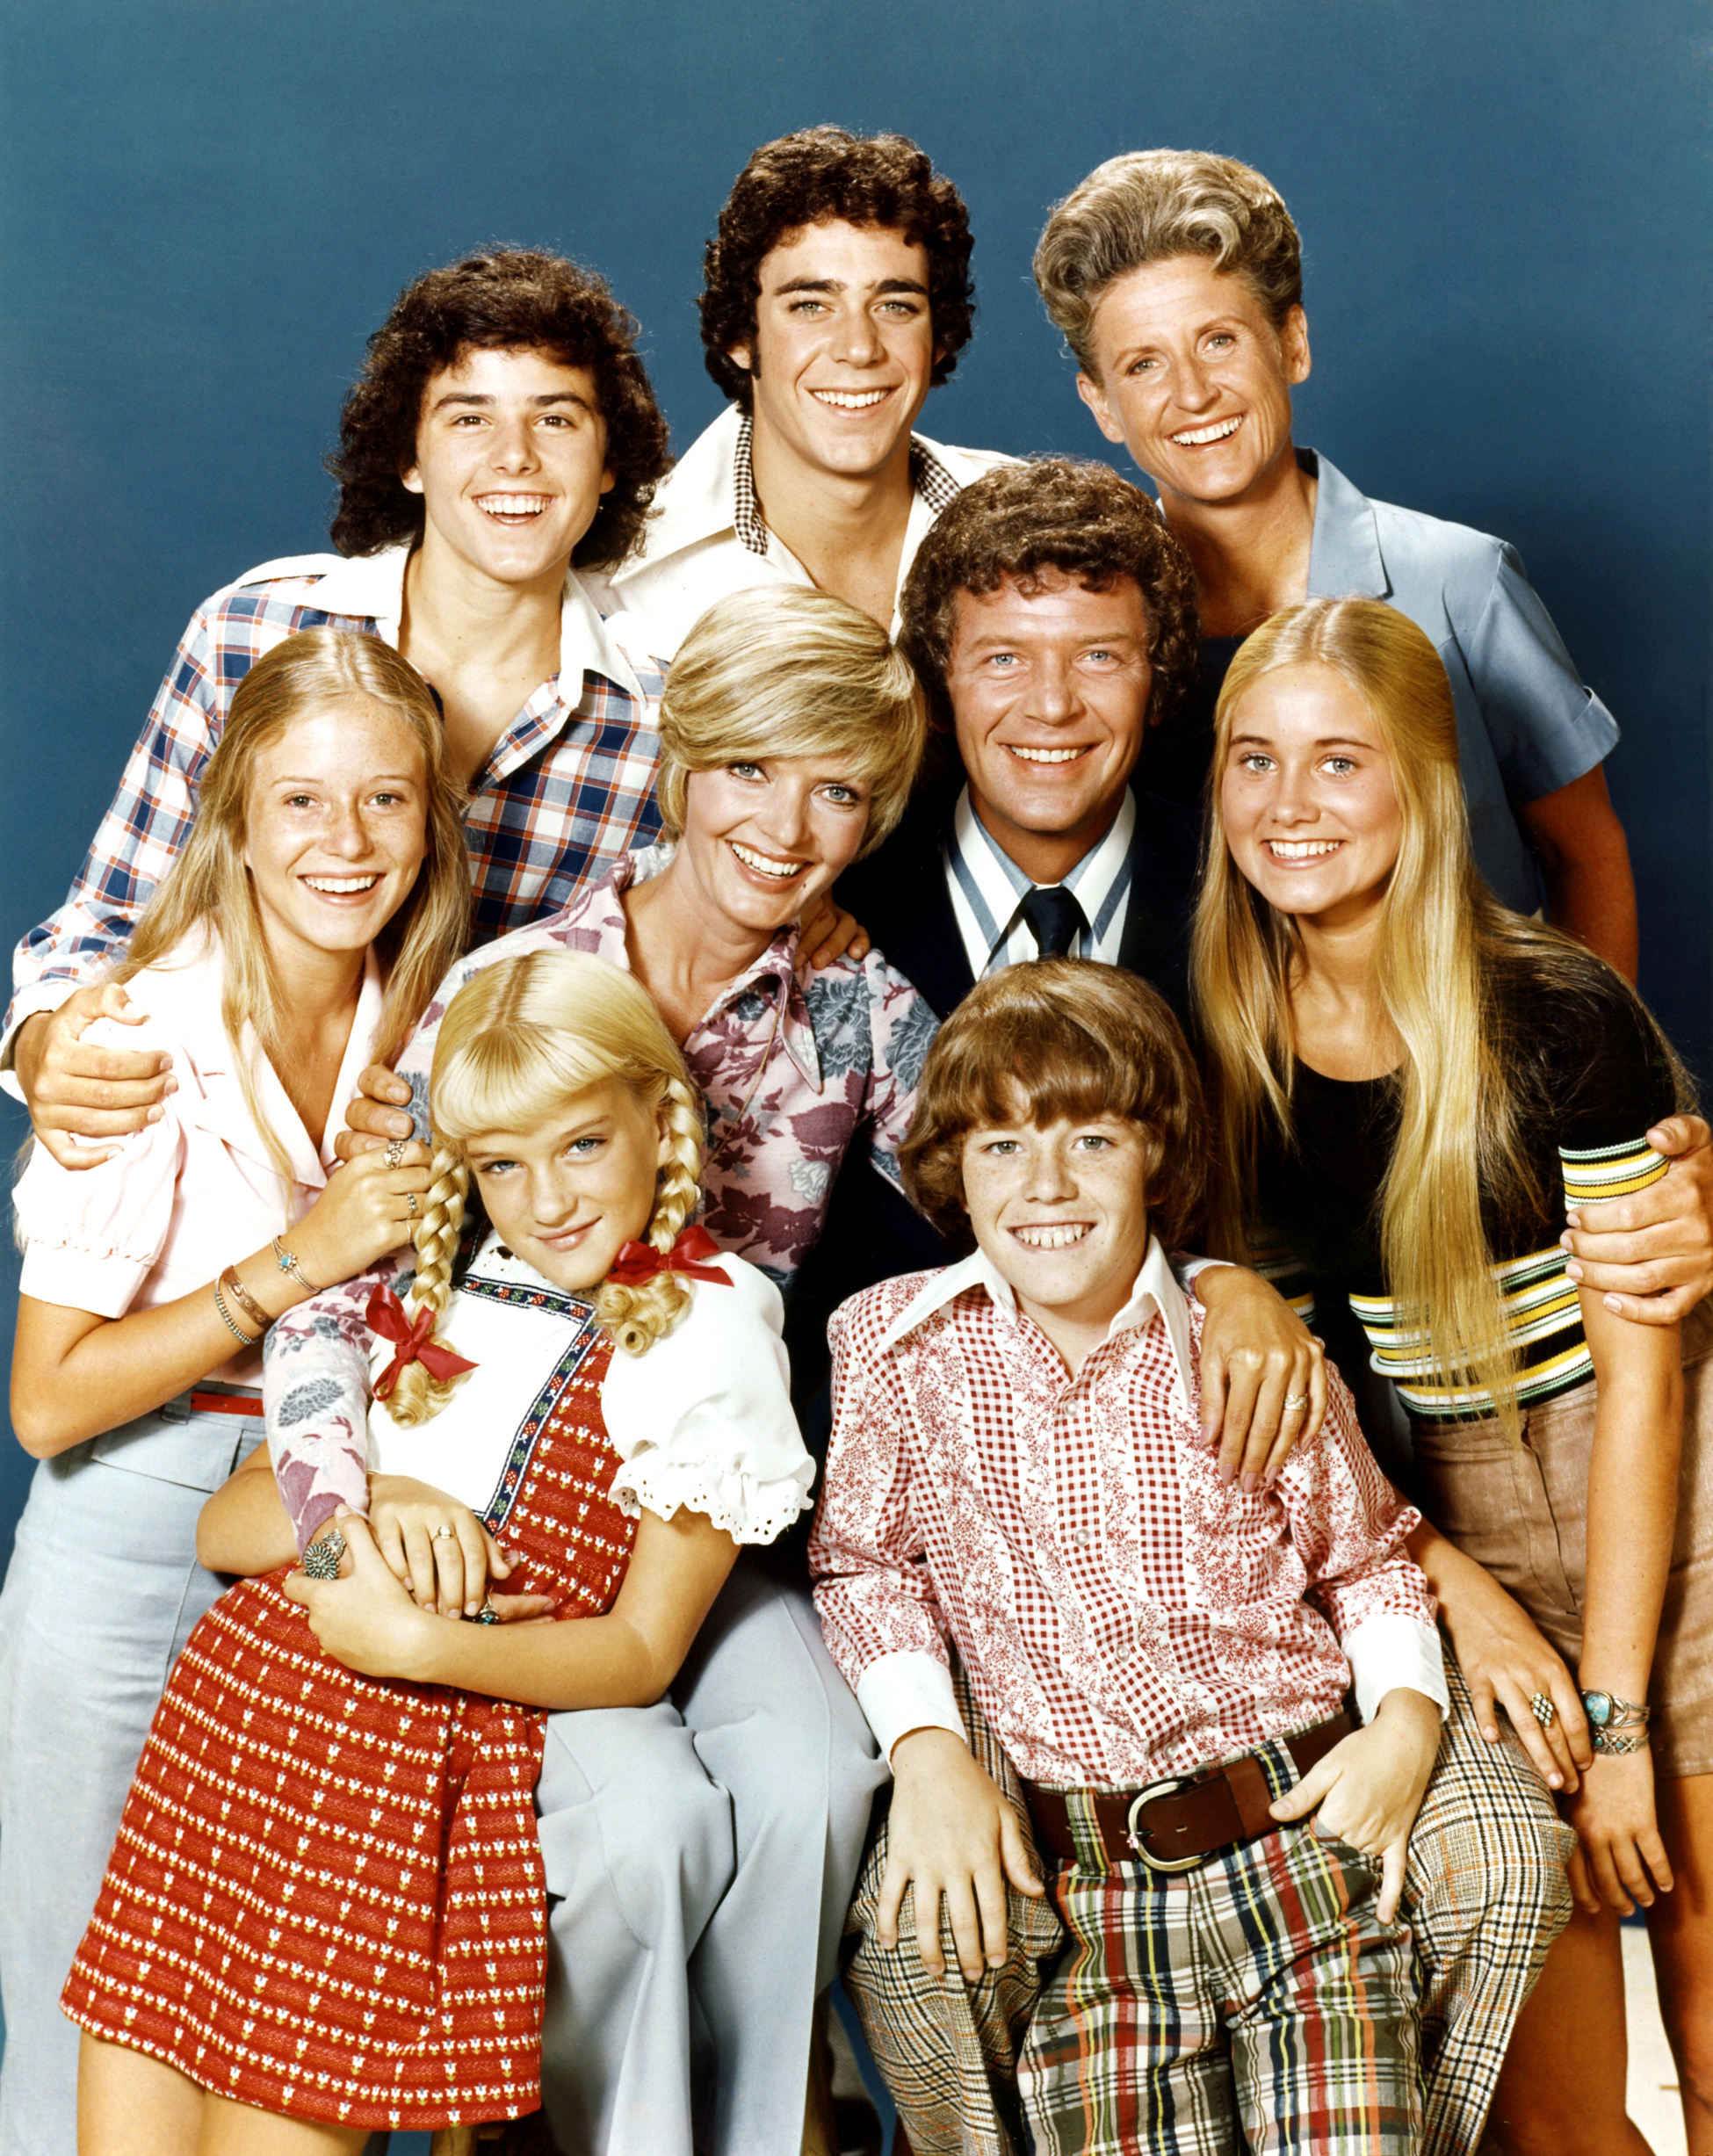 "The Brady Bunch" cast photographed in 1973 | Source: Getty images